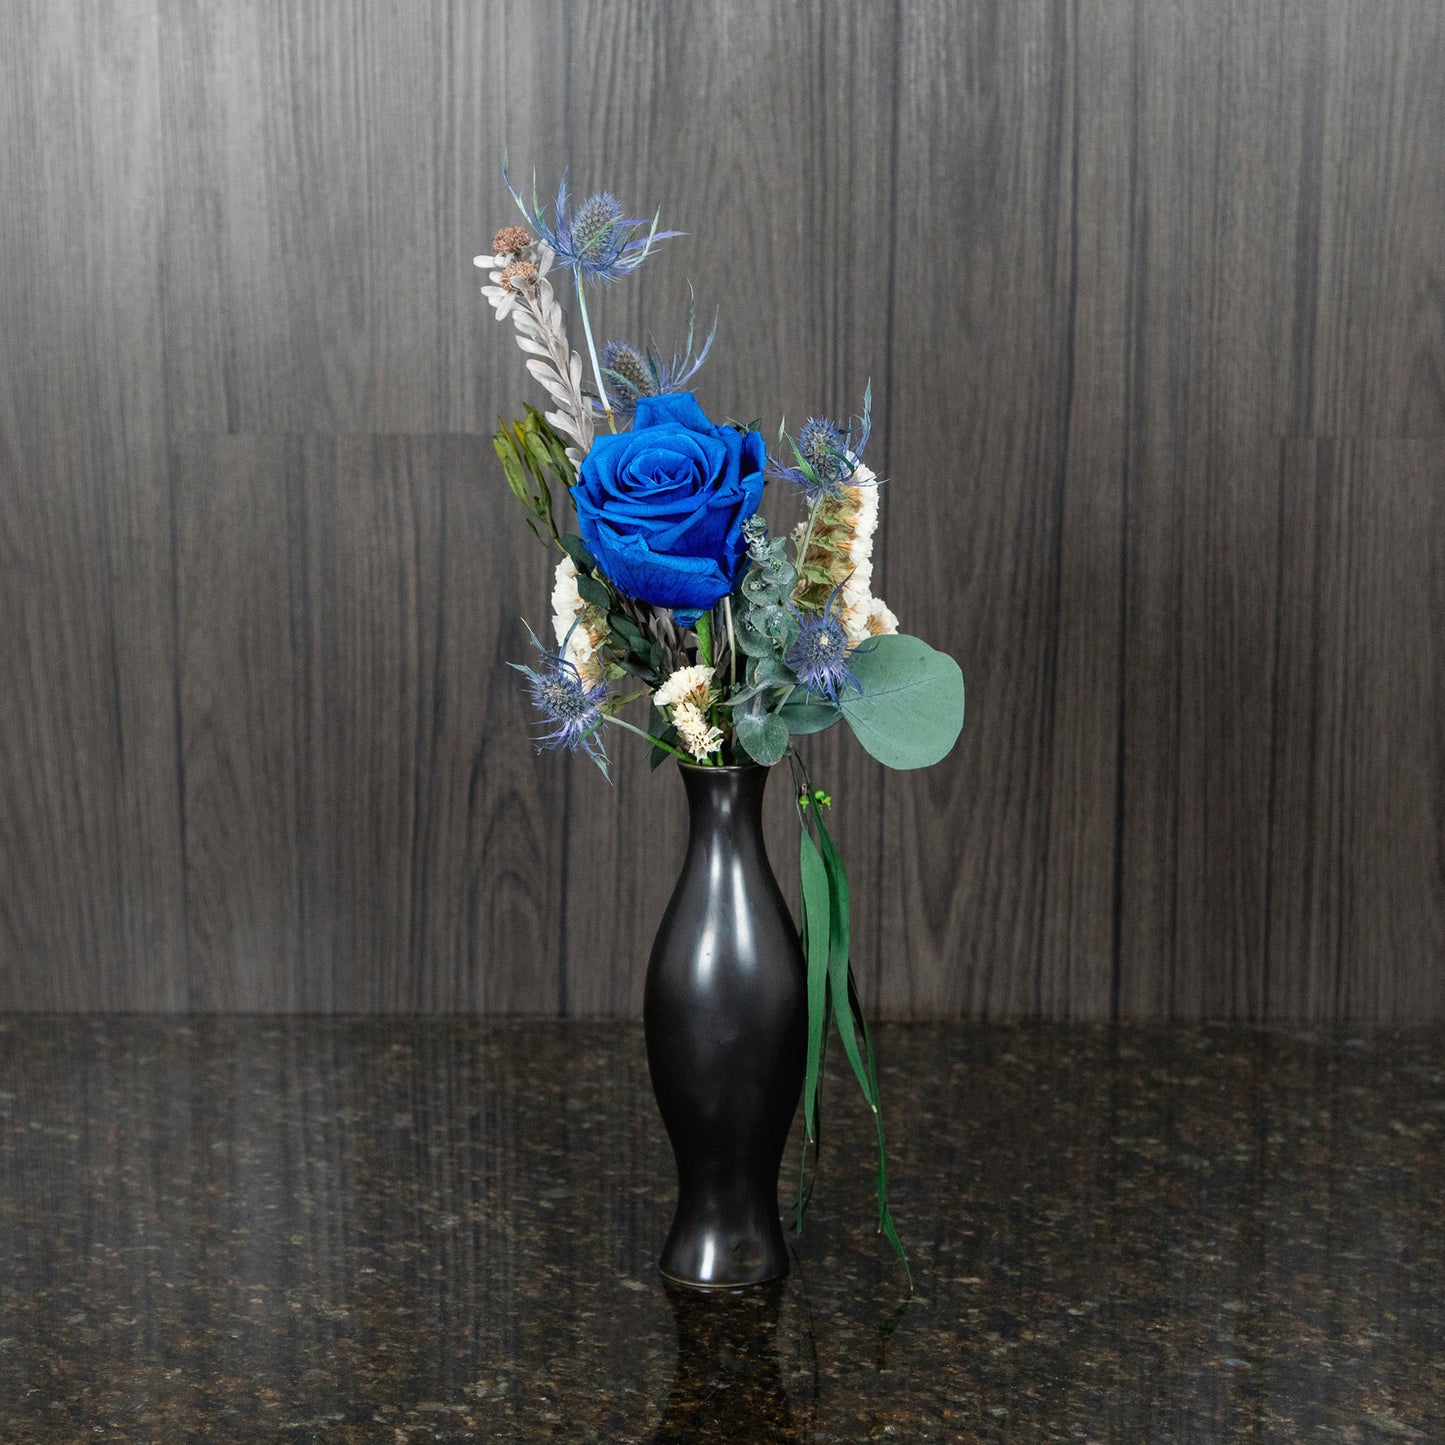 a single blue preserved rose, dried greenery, and dried thistle in a black ceramic bud vase